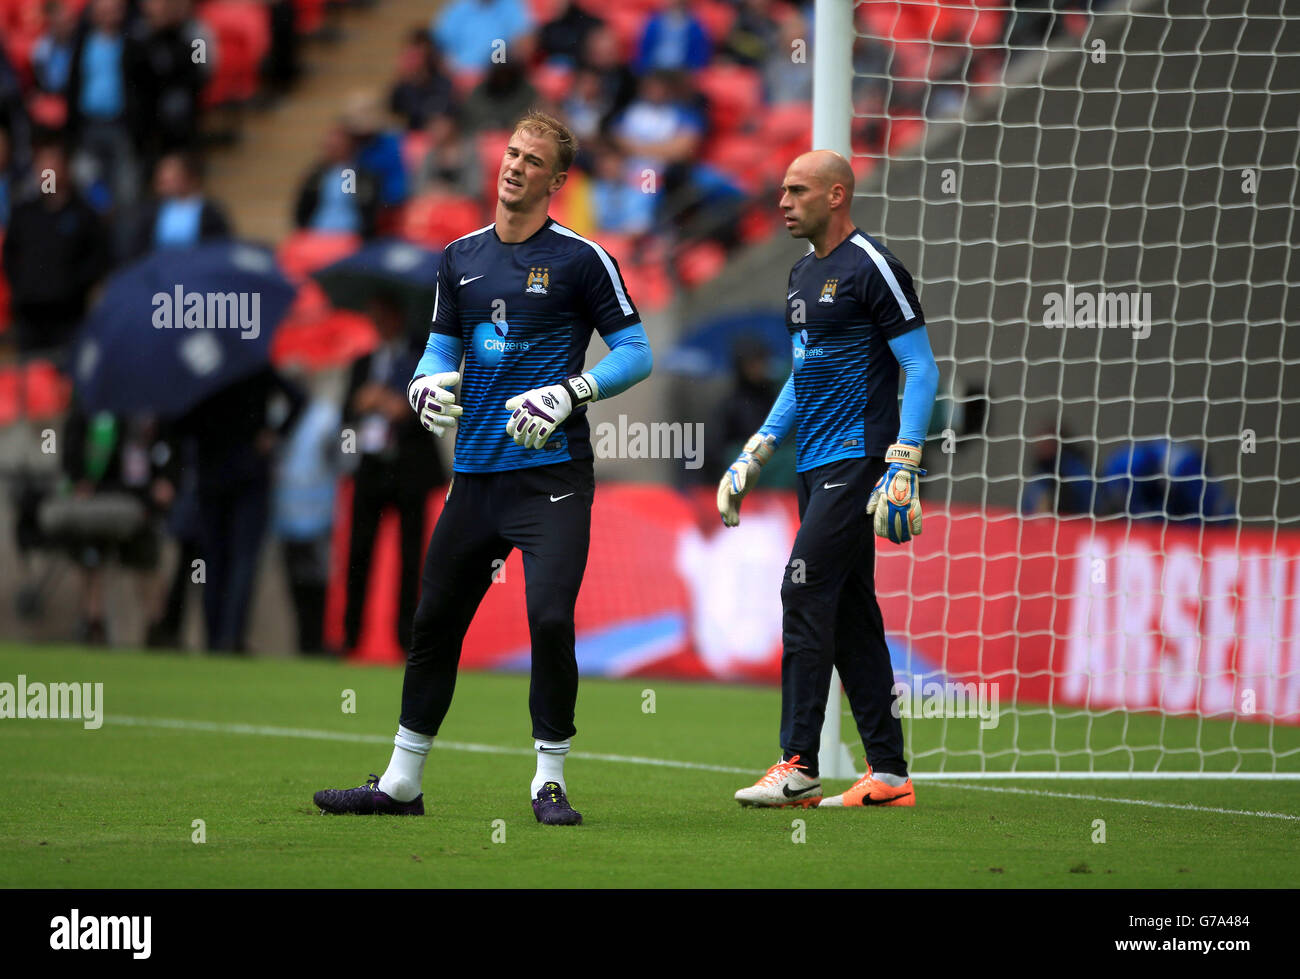 Manchester City goalkeeper Joe Hart during warm-up with team-mate Willy Caballero prior to the Community Shield match at Wembley Stadium, London. Stock Photo